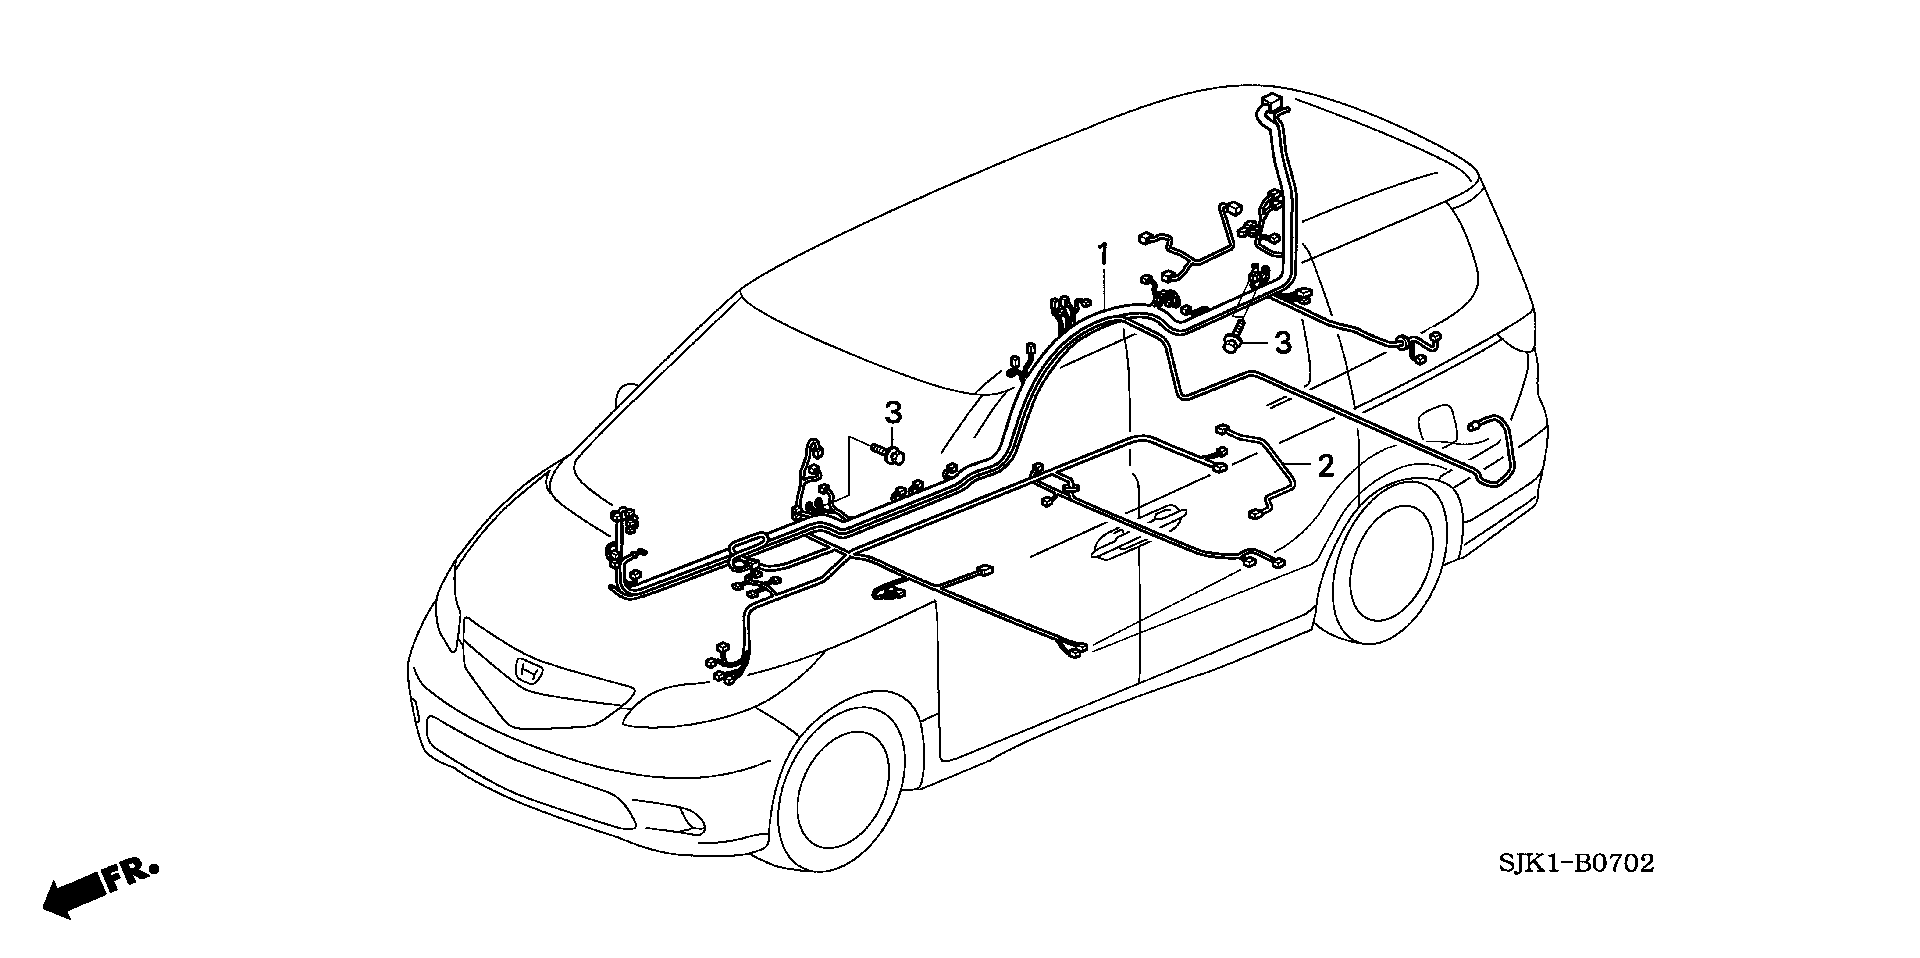 WIRE HARNESS(3)